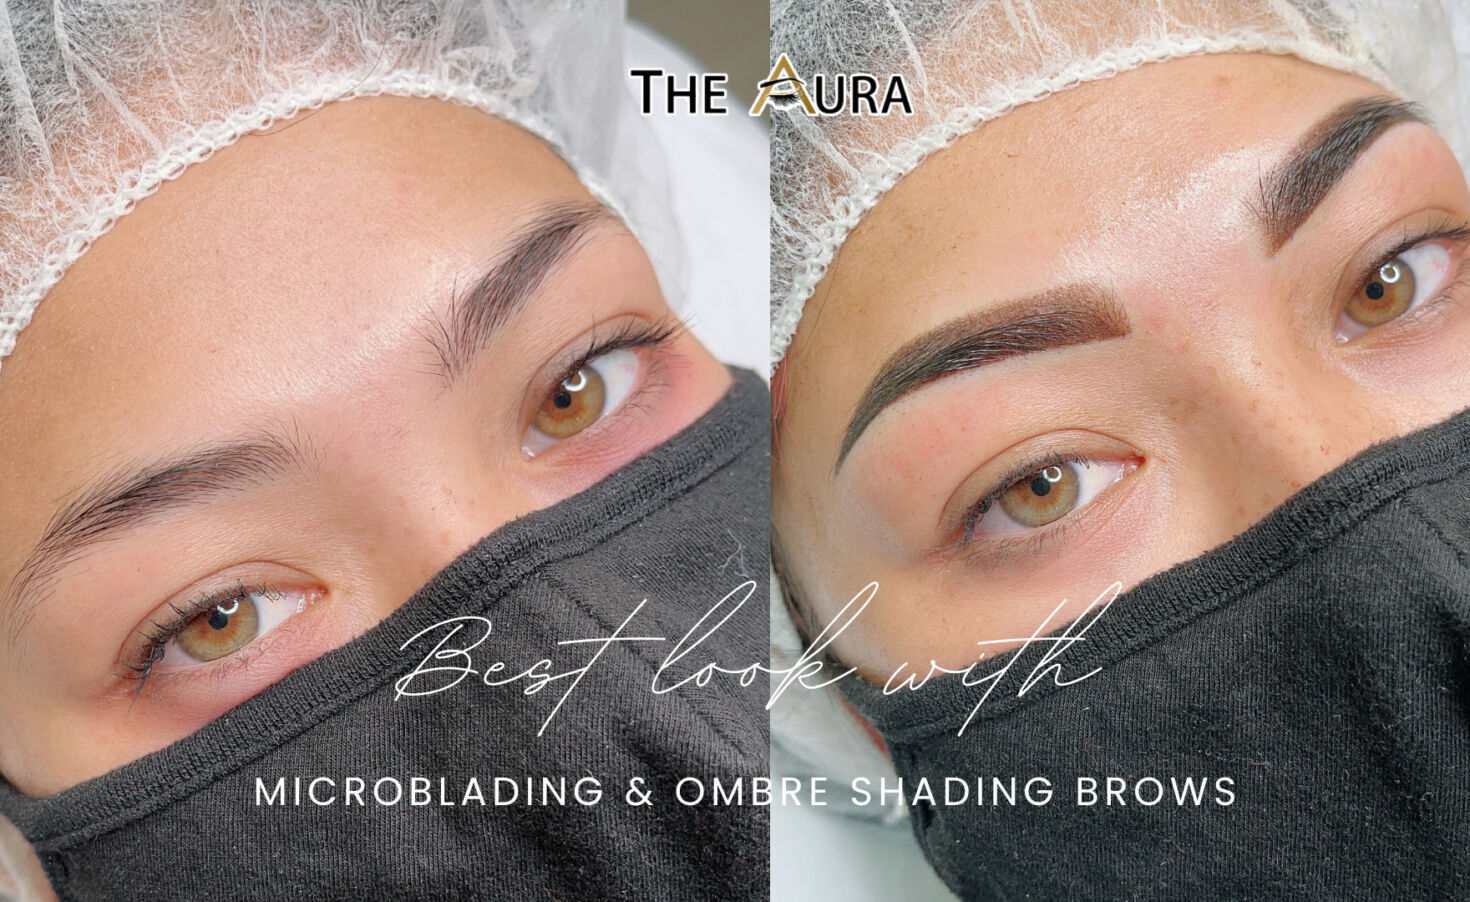 THE AURA BEAUTY ACADEMY The Aura is a beauty company that provides microblading, permanent cosmetic make-up, and provides licensing approved training academy in Westminster - Orange County California. 🏢 Address: 14550 MAGNOLIA ST, SUITE 206, WESTMINSTER, CA 92683 ☎ Hotline: (714) 989-6268 / 833-THEAURA (833-843-2872) 🌐Instagram: Aura Beauty Company